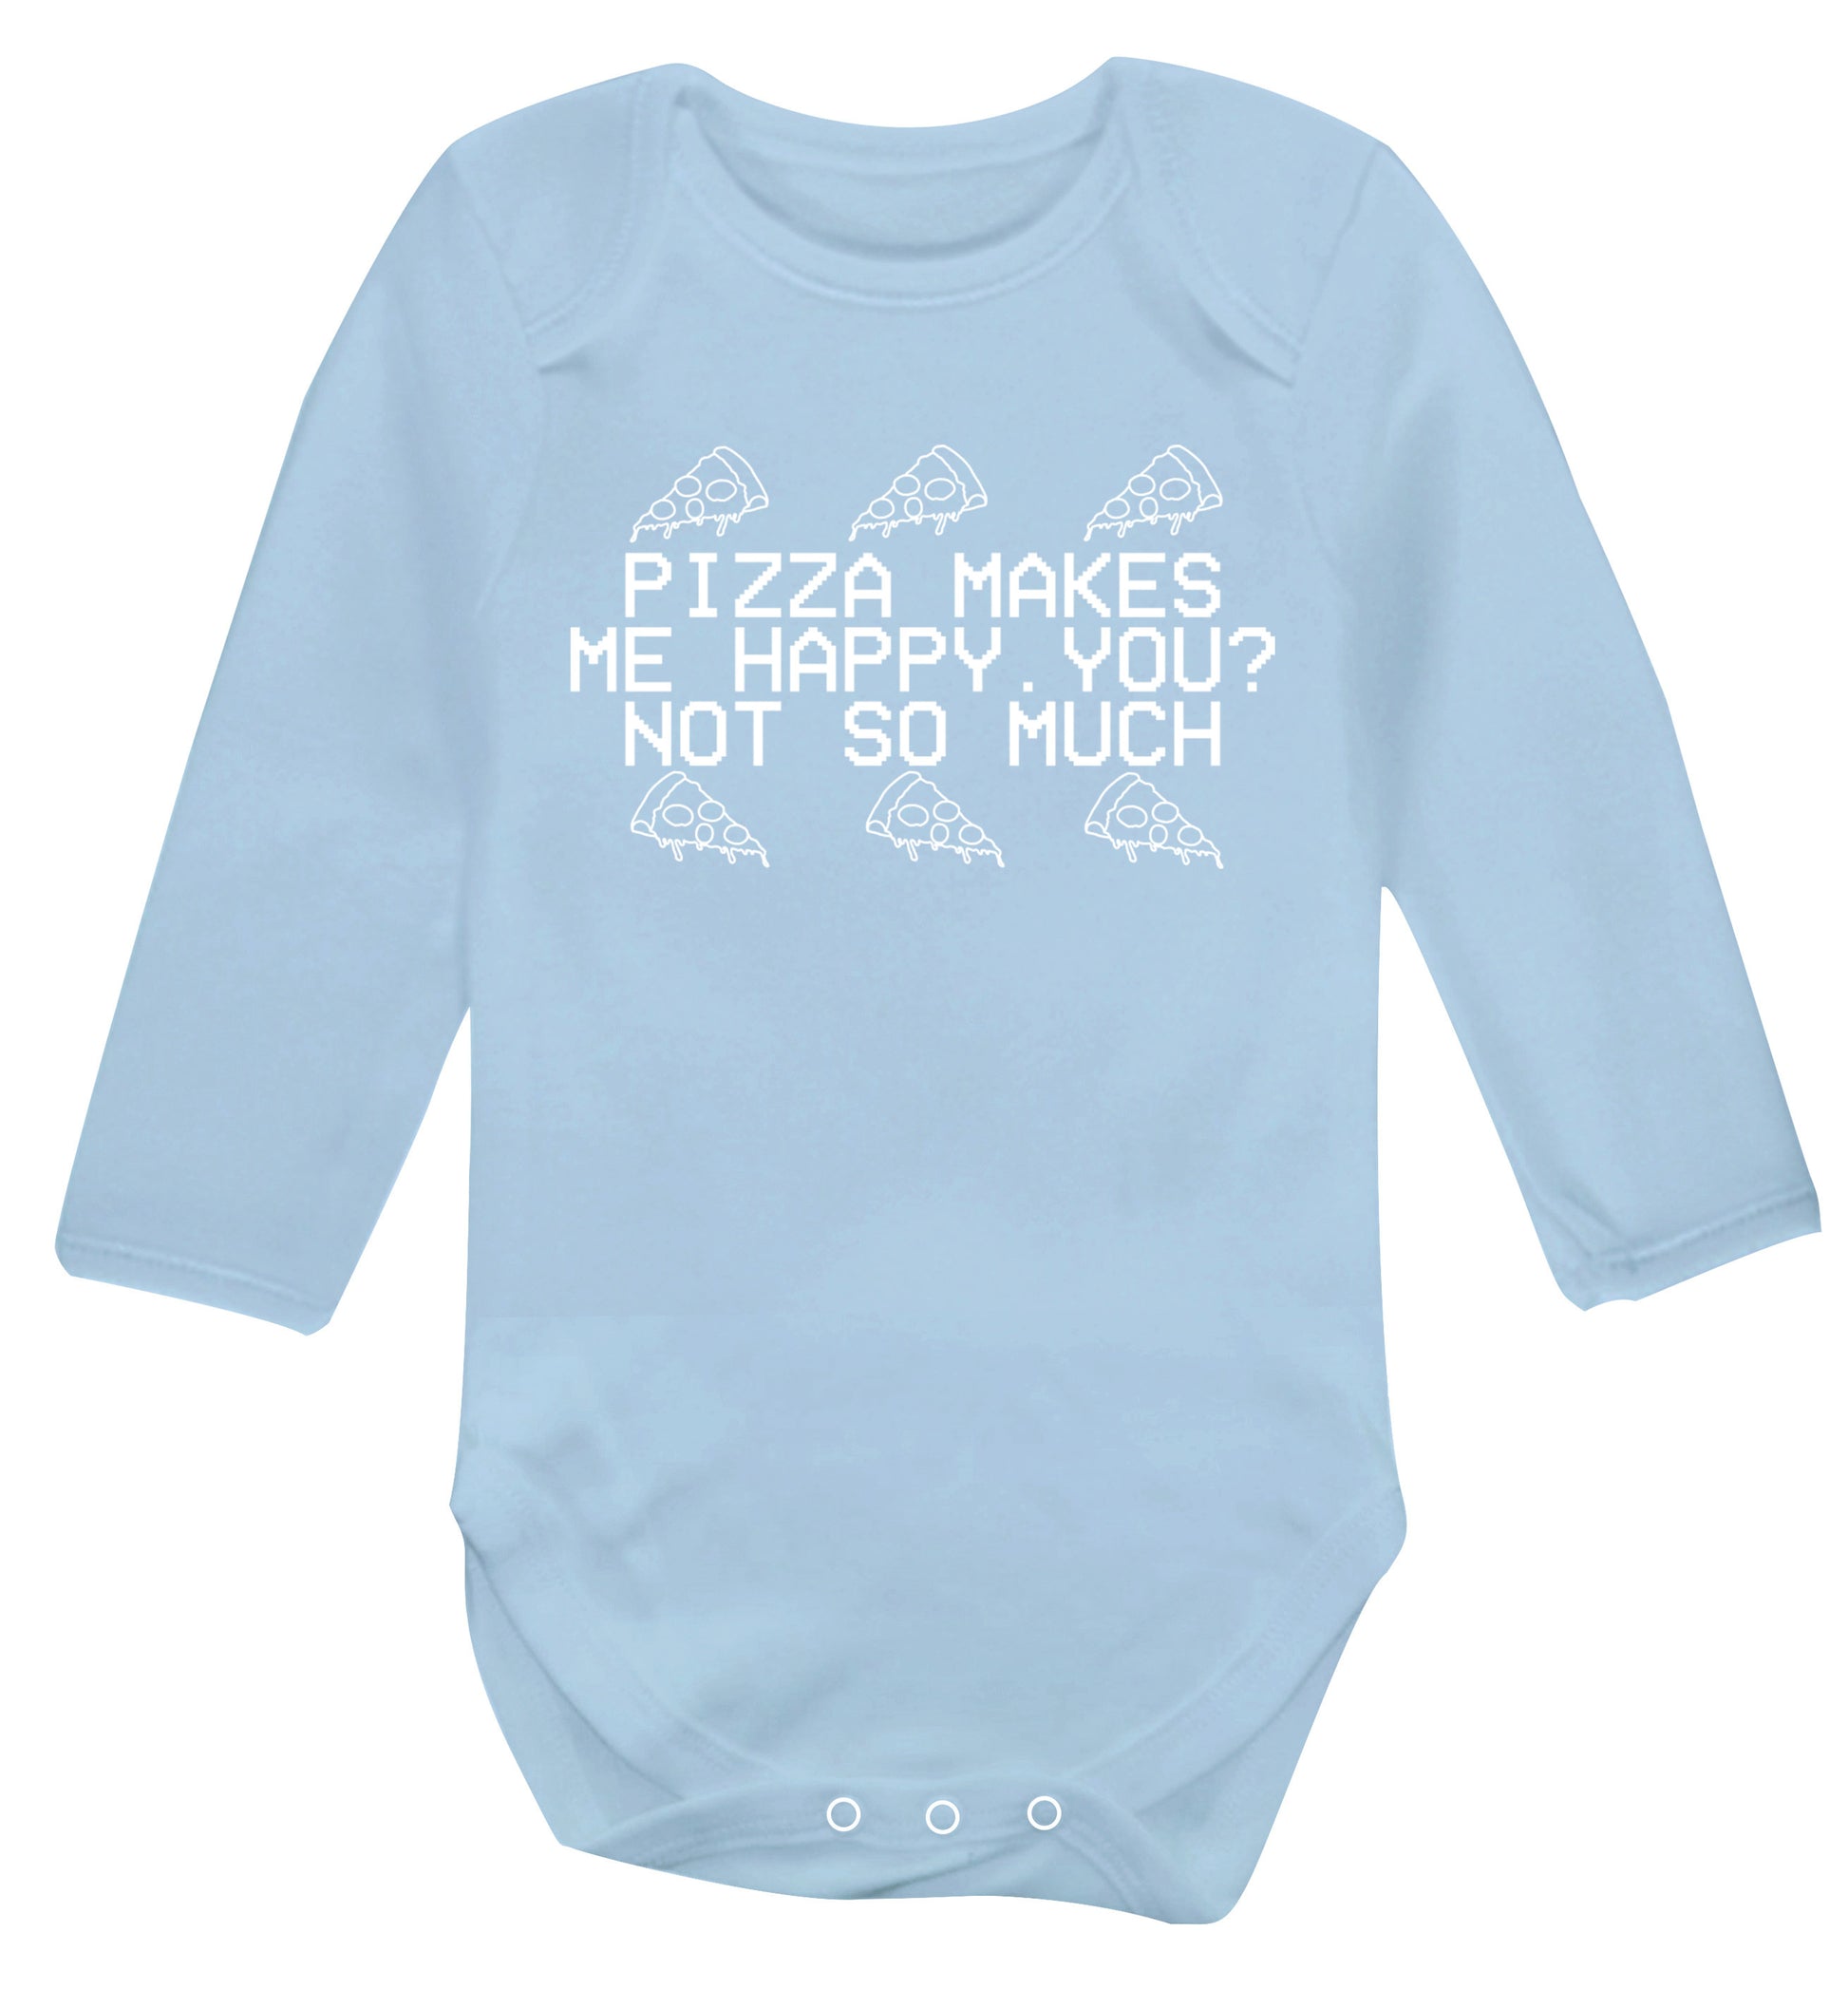 Pizza makes me happy, You? Not so much Baby Vest long sleeved pale blue 6-12 months